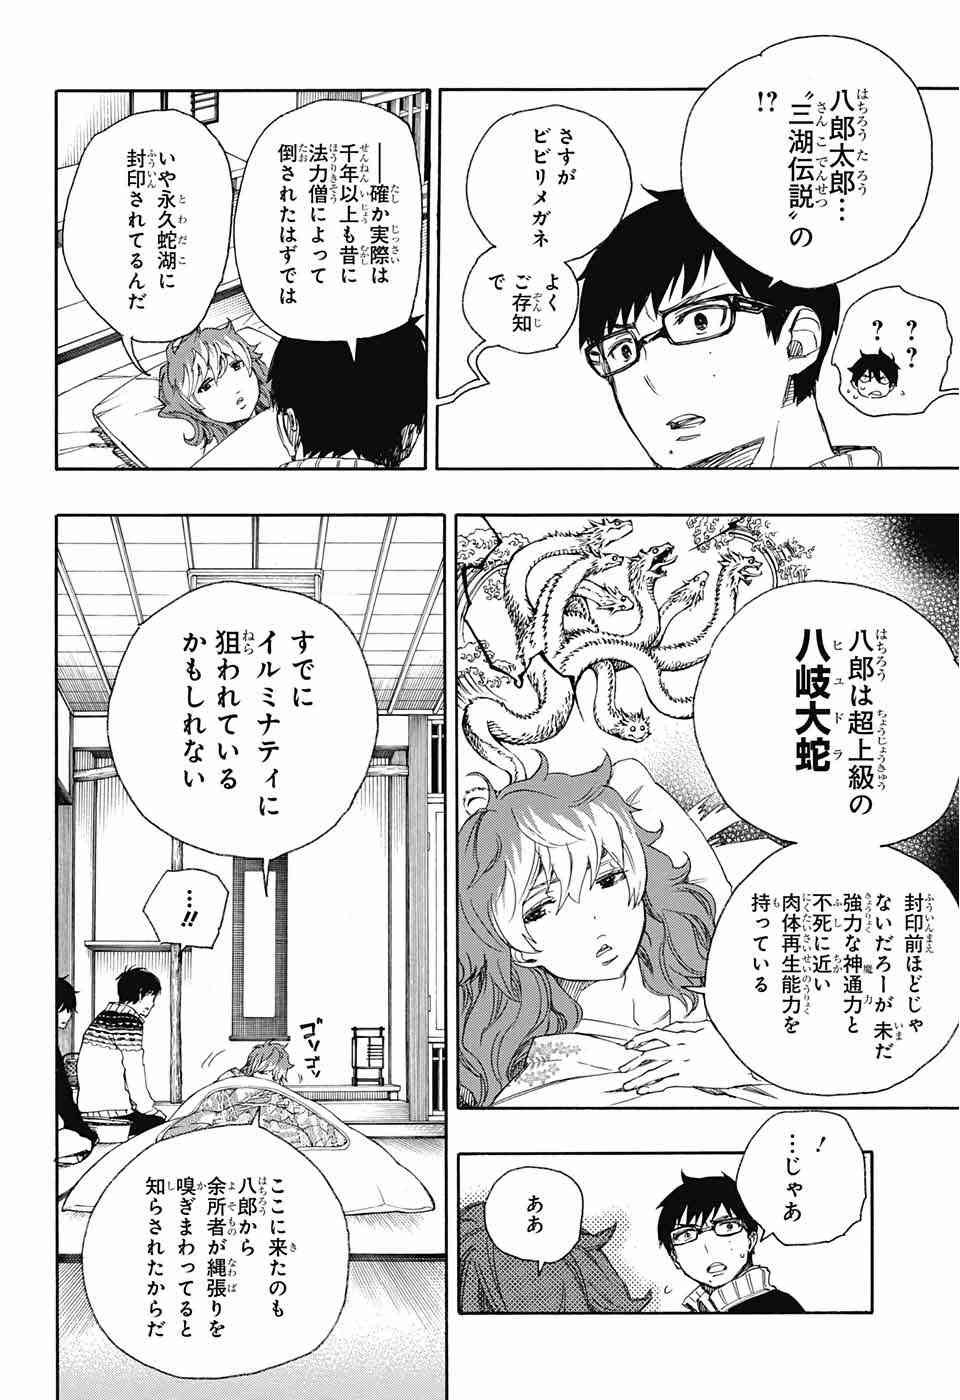 Ao no Exorcist - Chapter 76 - Page 2